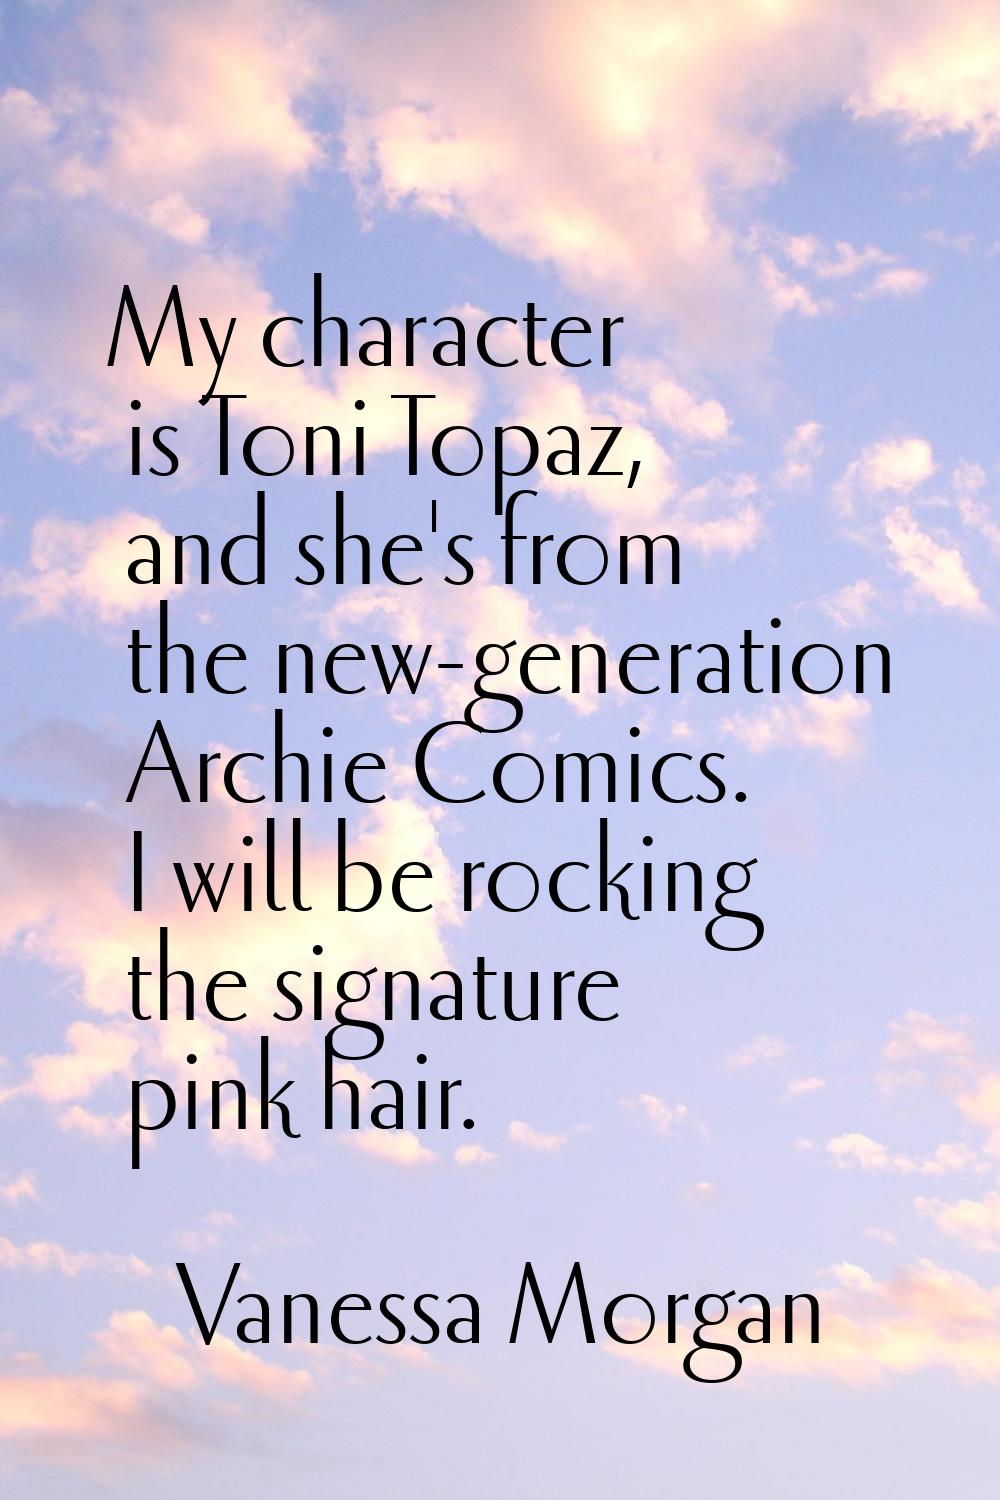 My character is Toni Topaz, and she's from the new-generation Archie Comics. I will be rocking the 